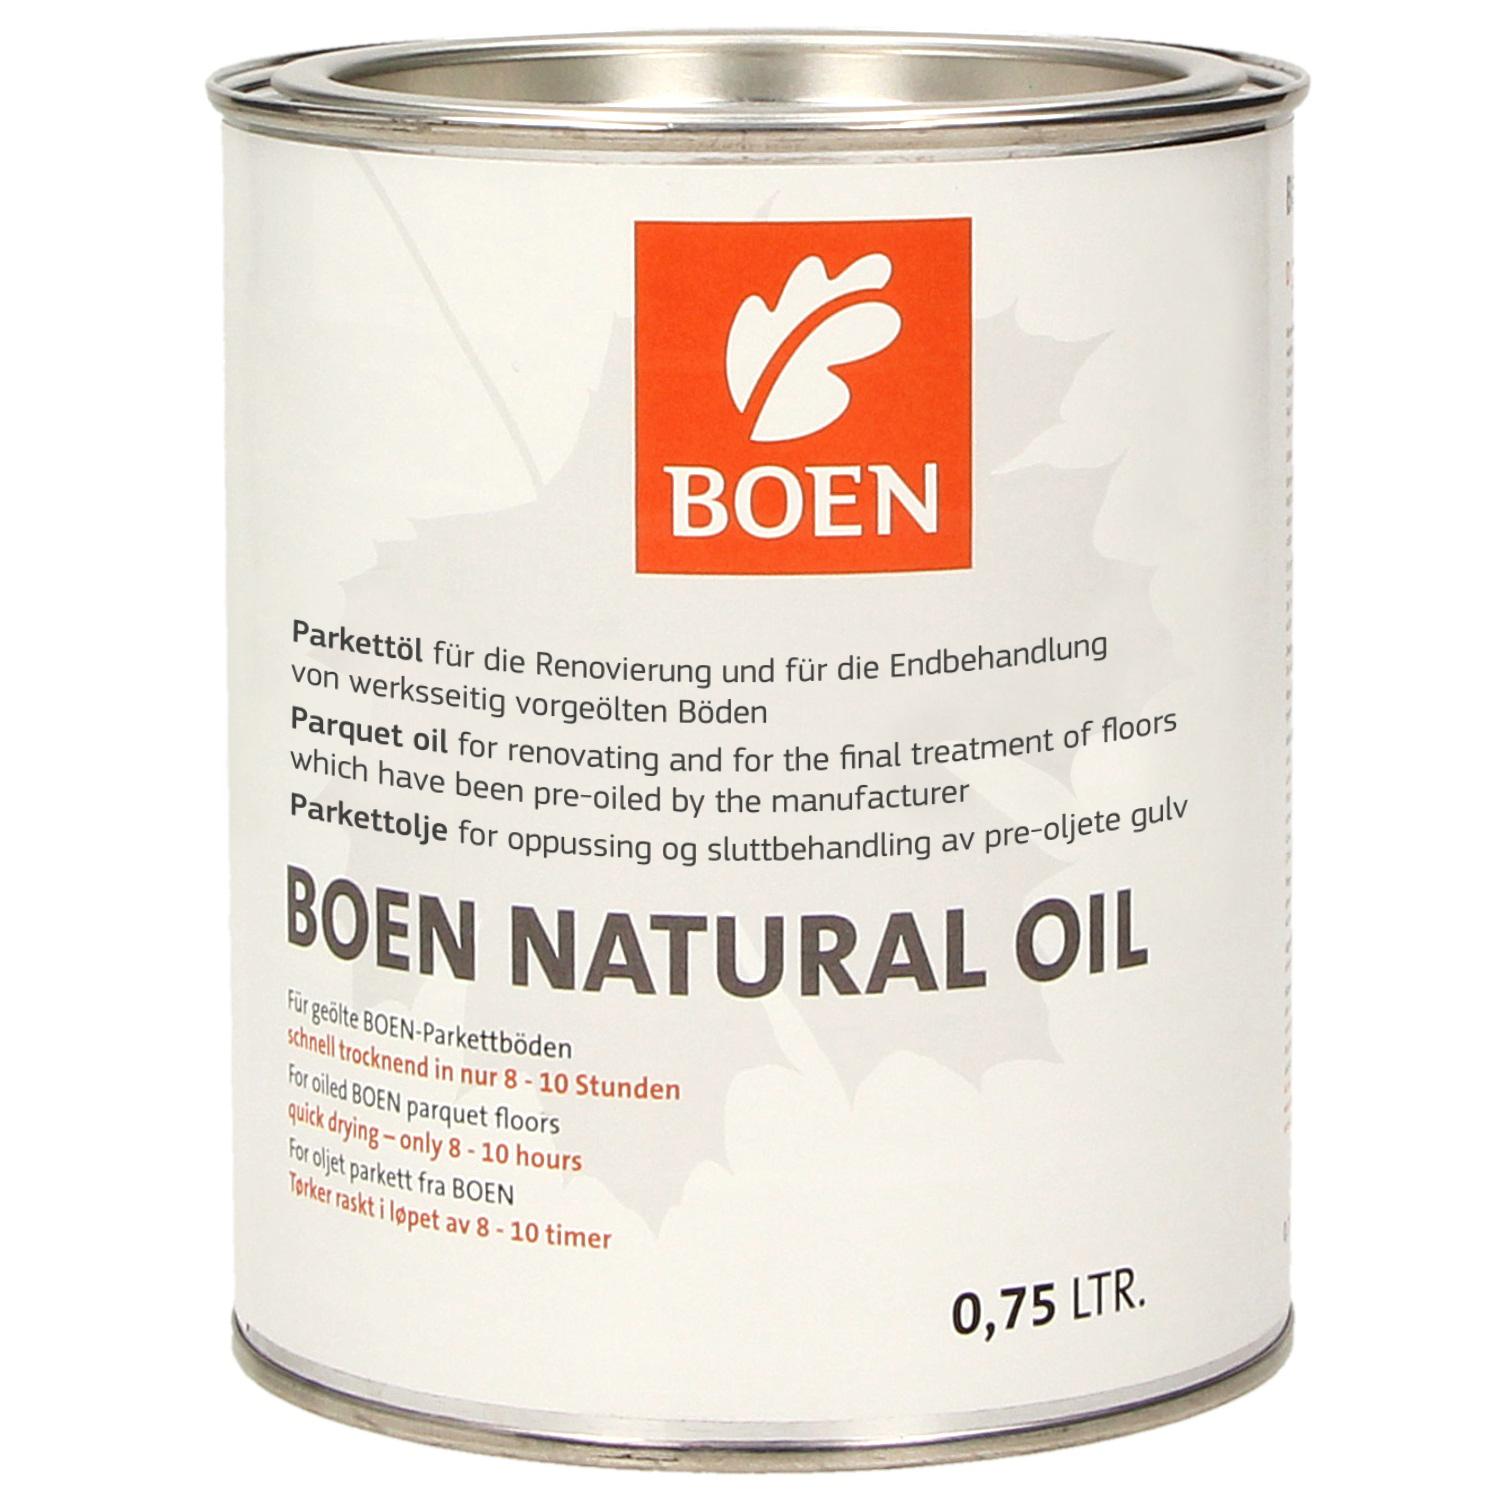 BOEN Natural Oil transparent 0,75l

For finishing of sanded
or untreated wooden surfaces.
1 litre for approx. 24m²